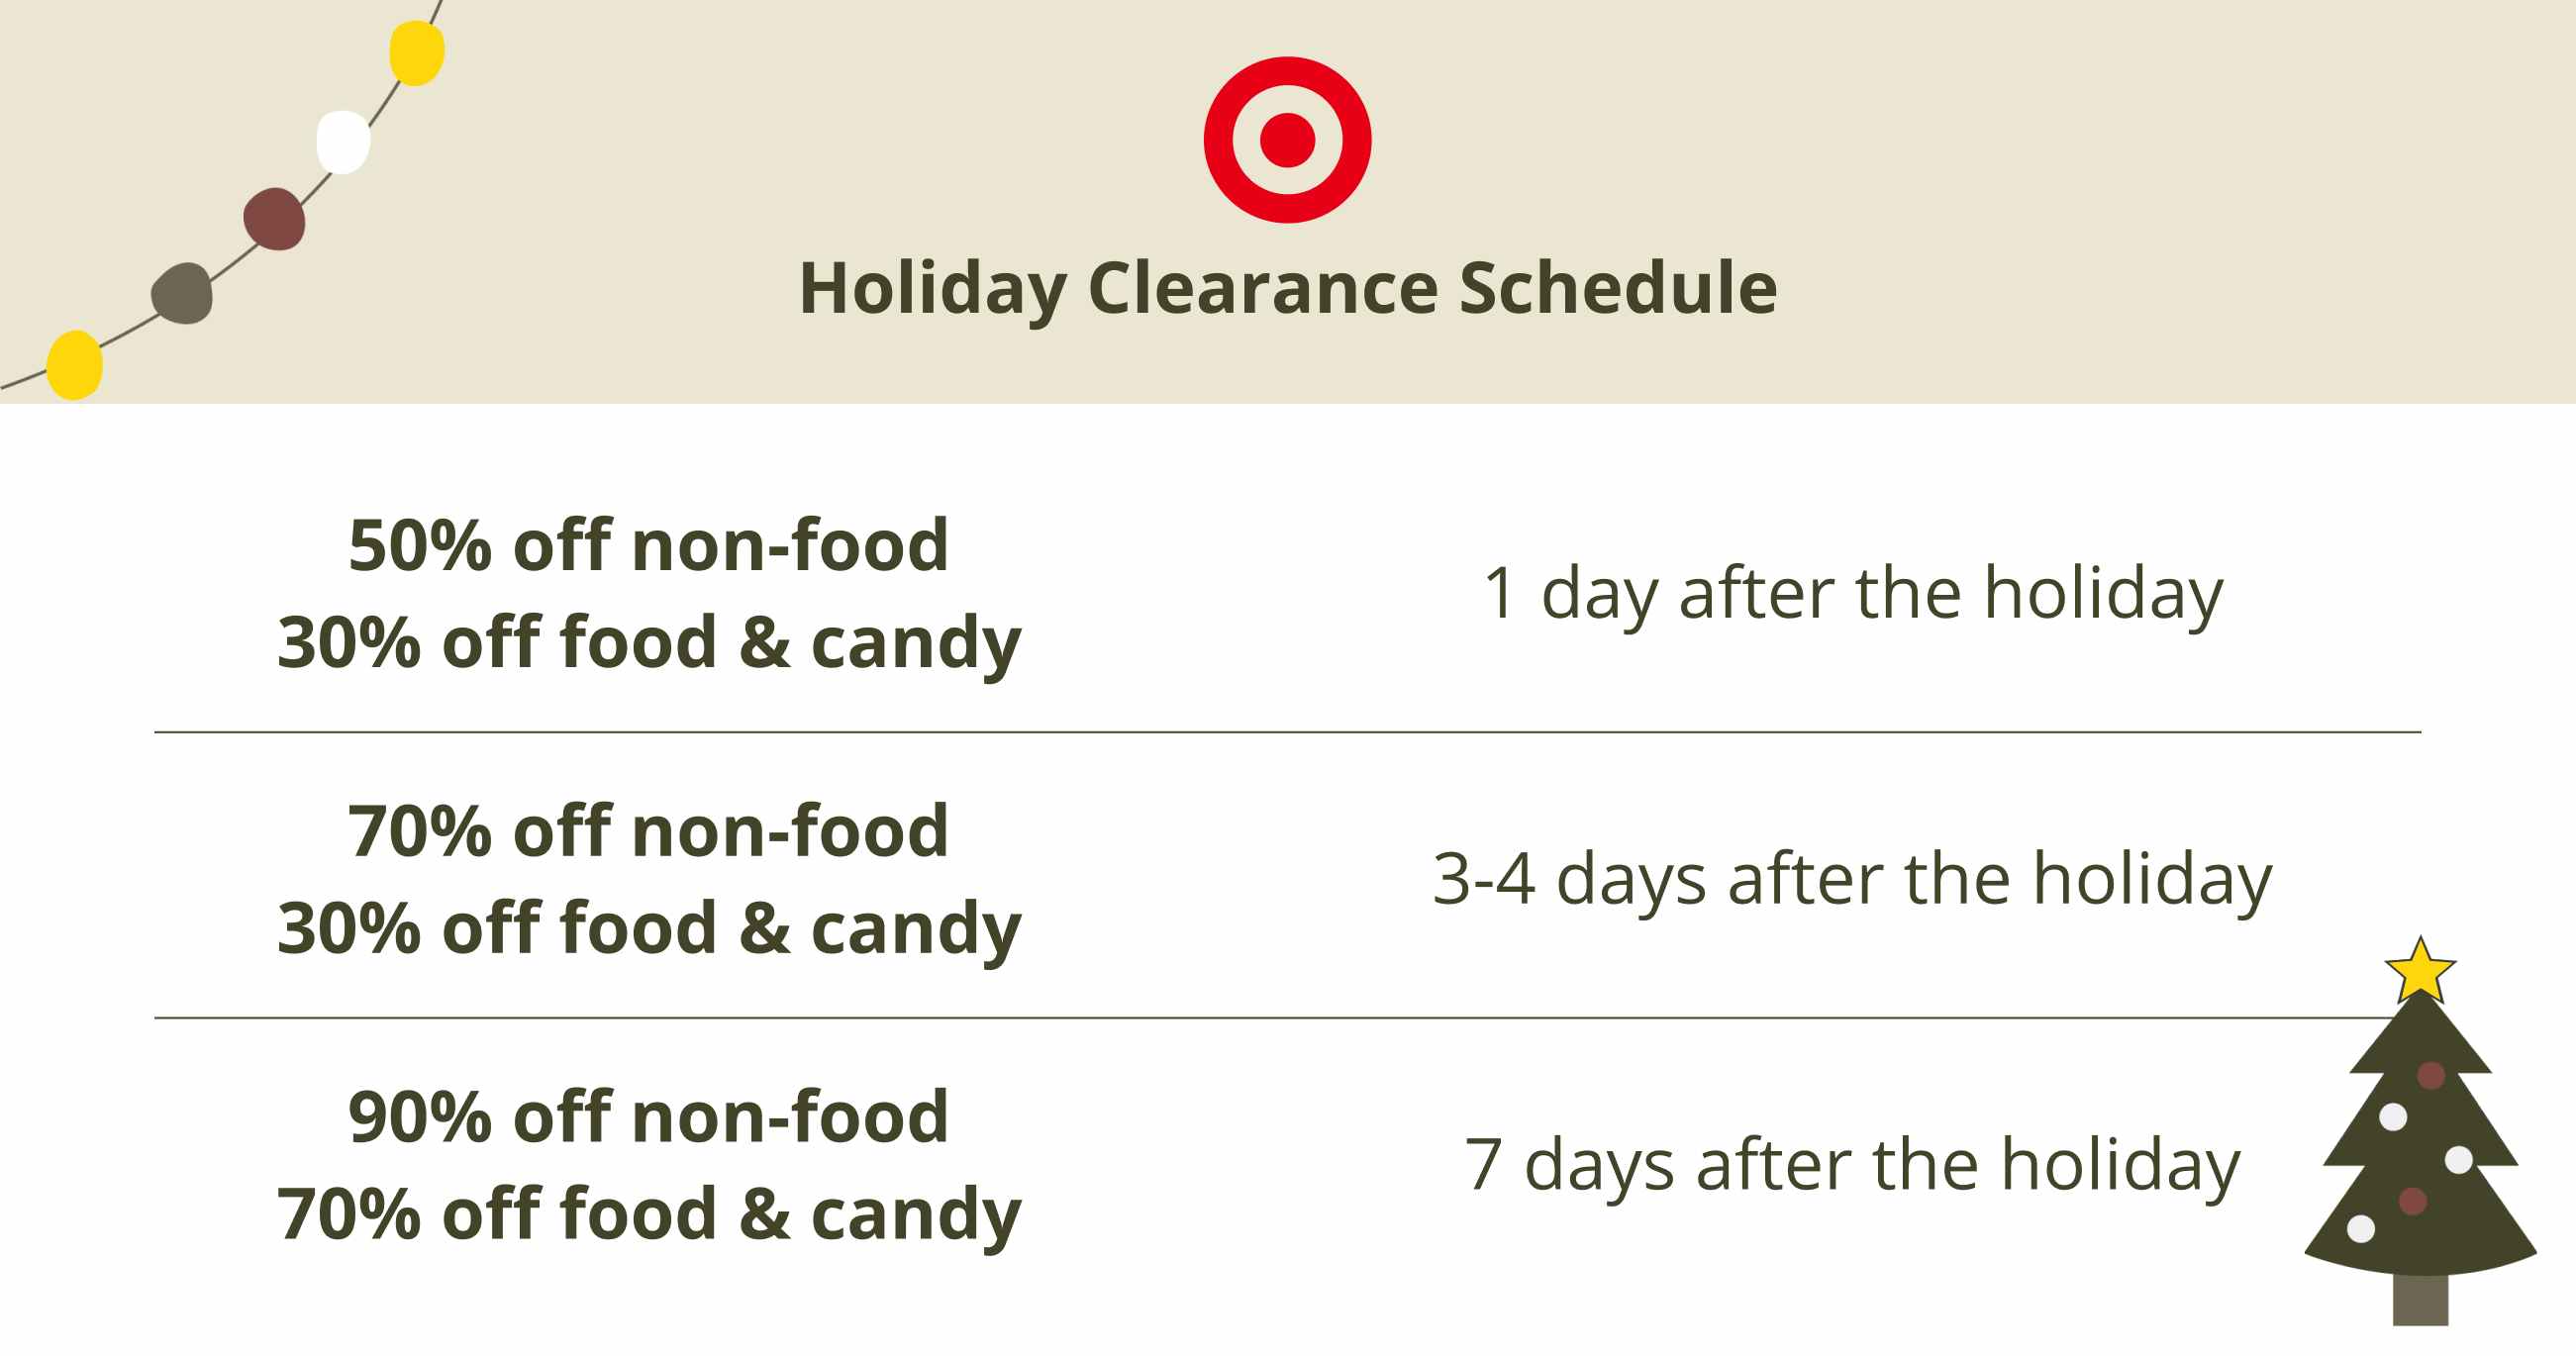 https://prod-cdn-thekrazycouponlady.imgix.net/wp-content/uploads/2023/04/target-holiday-clearance-schedule-edit-1682096009-1682096009.png?auto=format&fit=fill&q=25